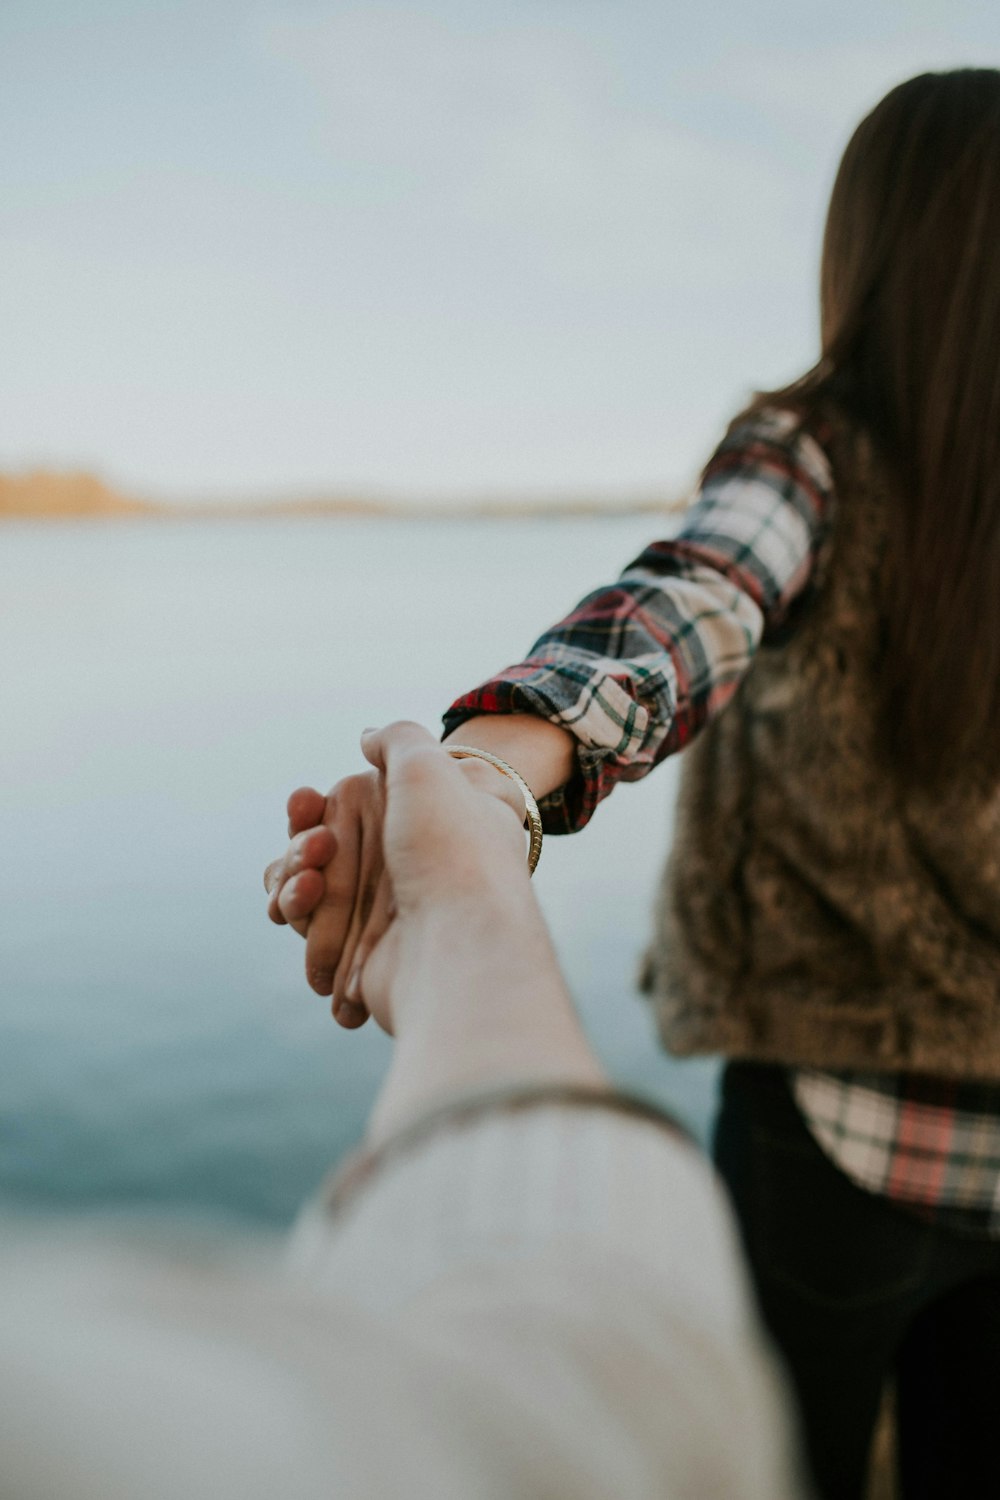 shallow focus photography of man and woman holding hands